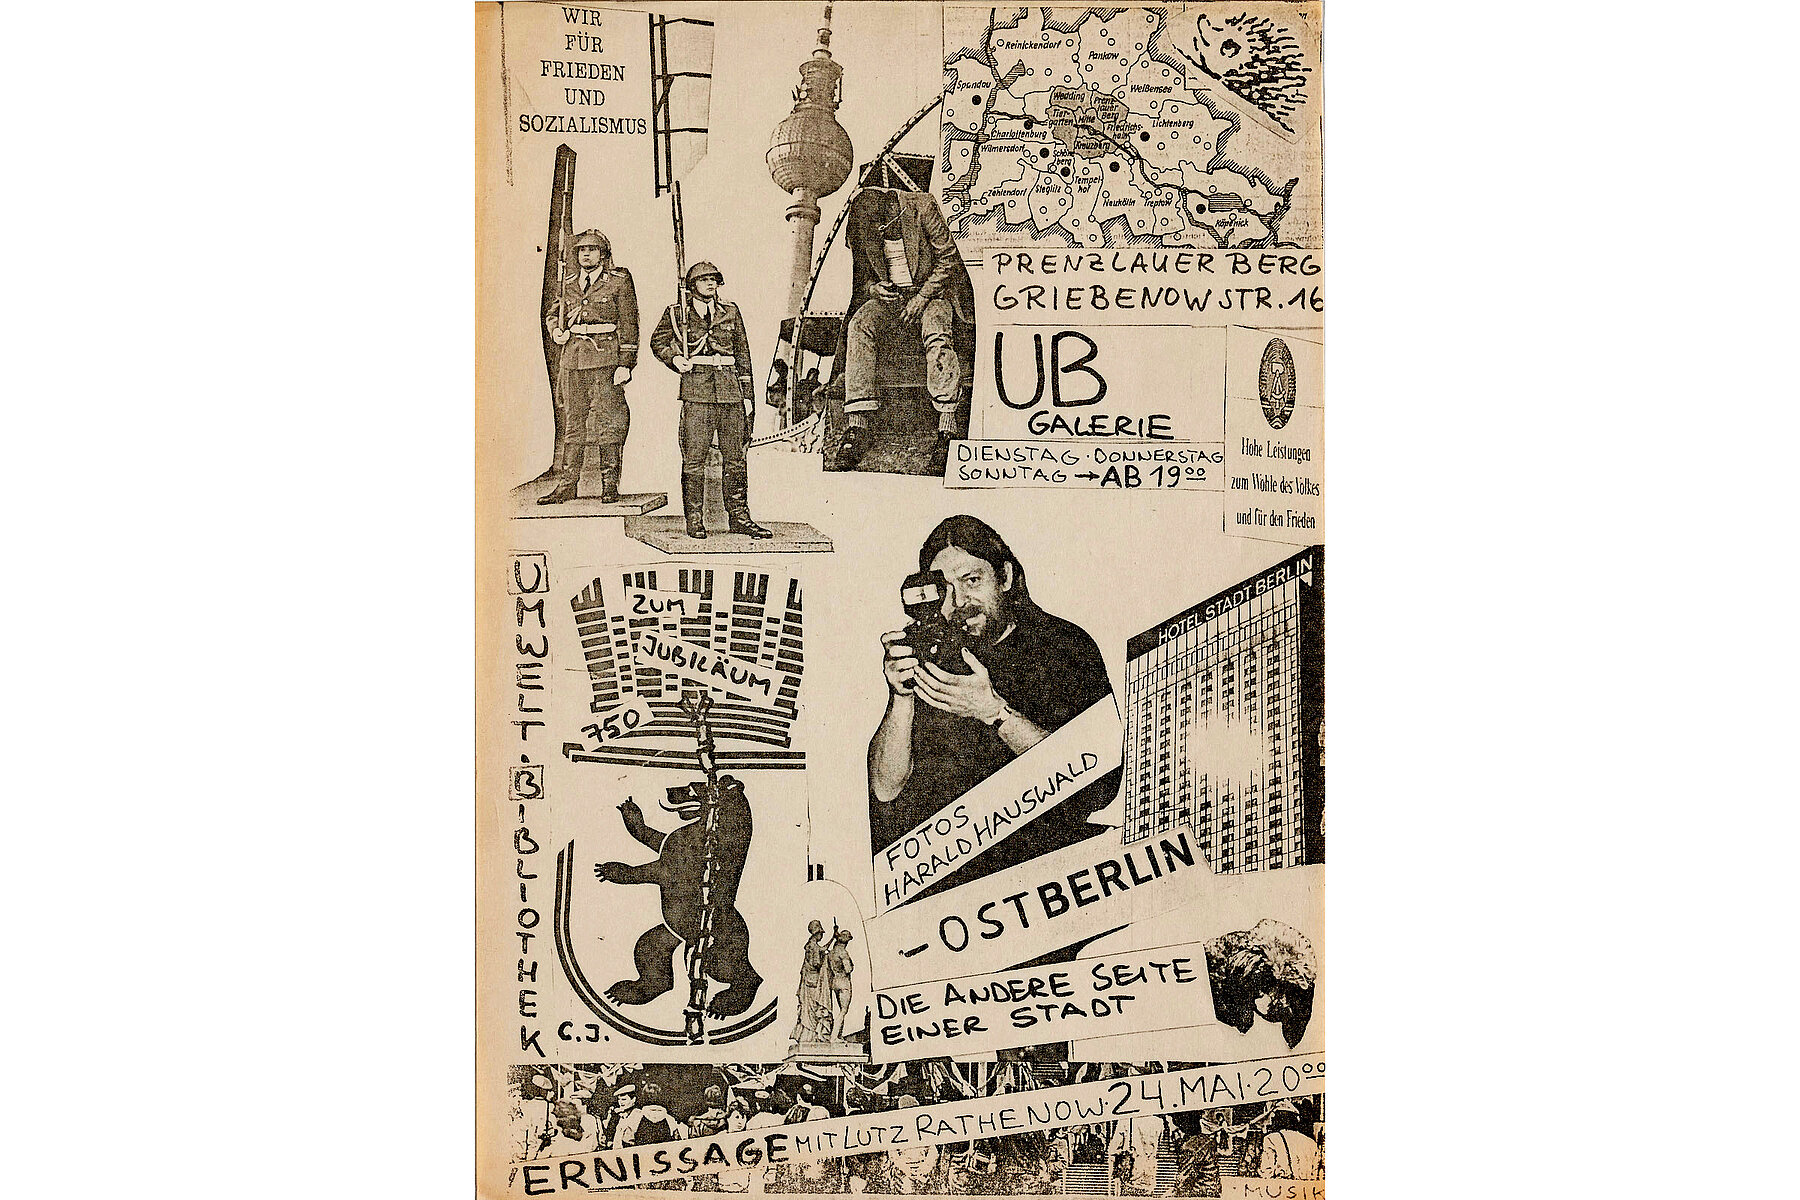 Organised by the Umweltbibliothek, a collage with Berlin-related drawings and photos advertises an exhibition of pictures by photographer Harald Hauswald. 